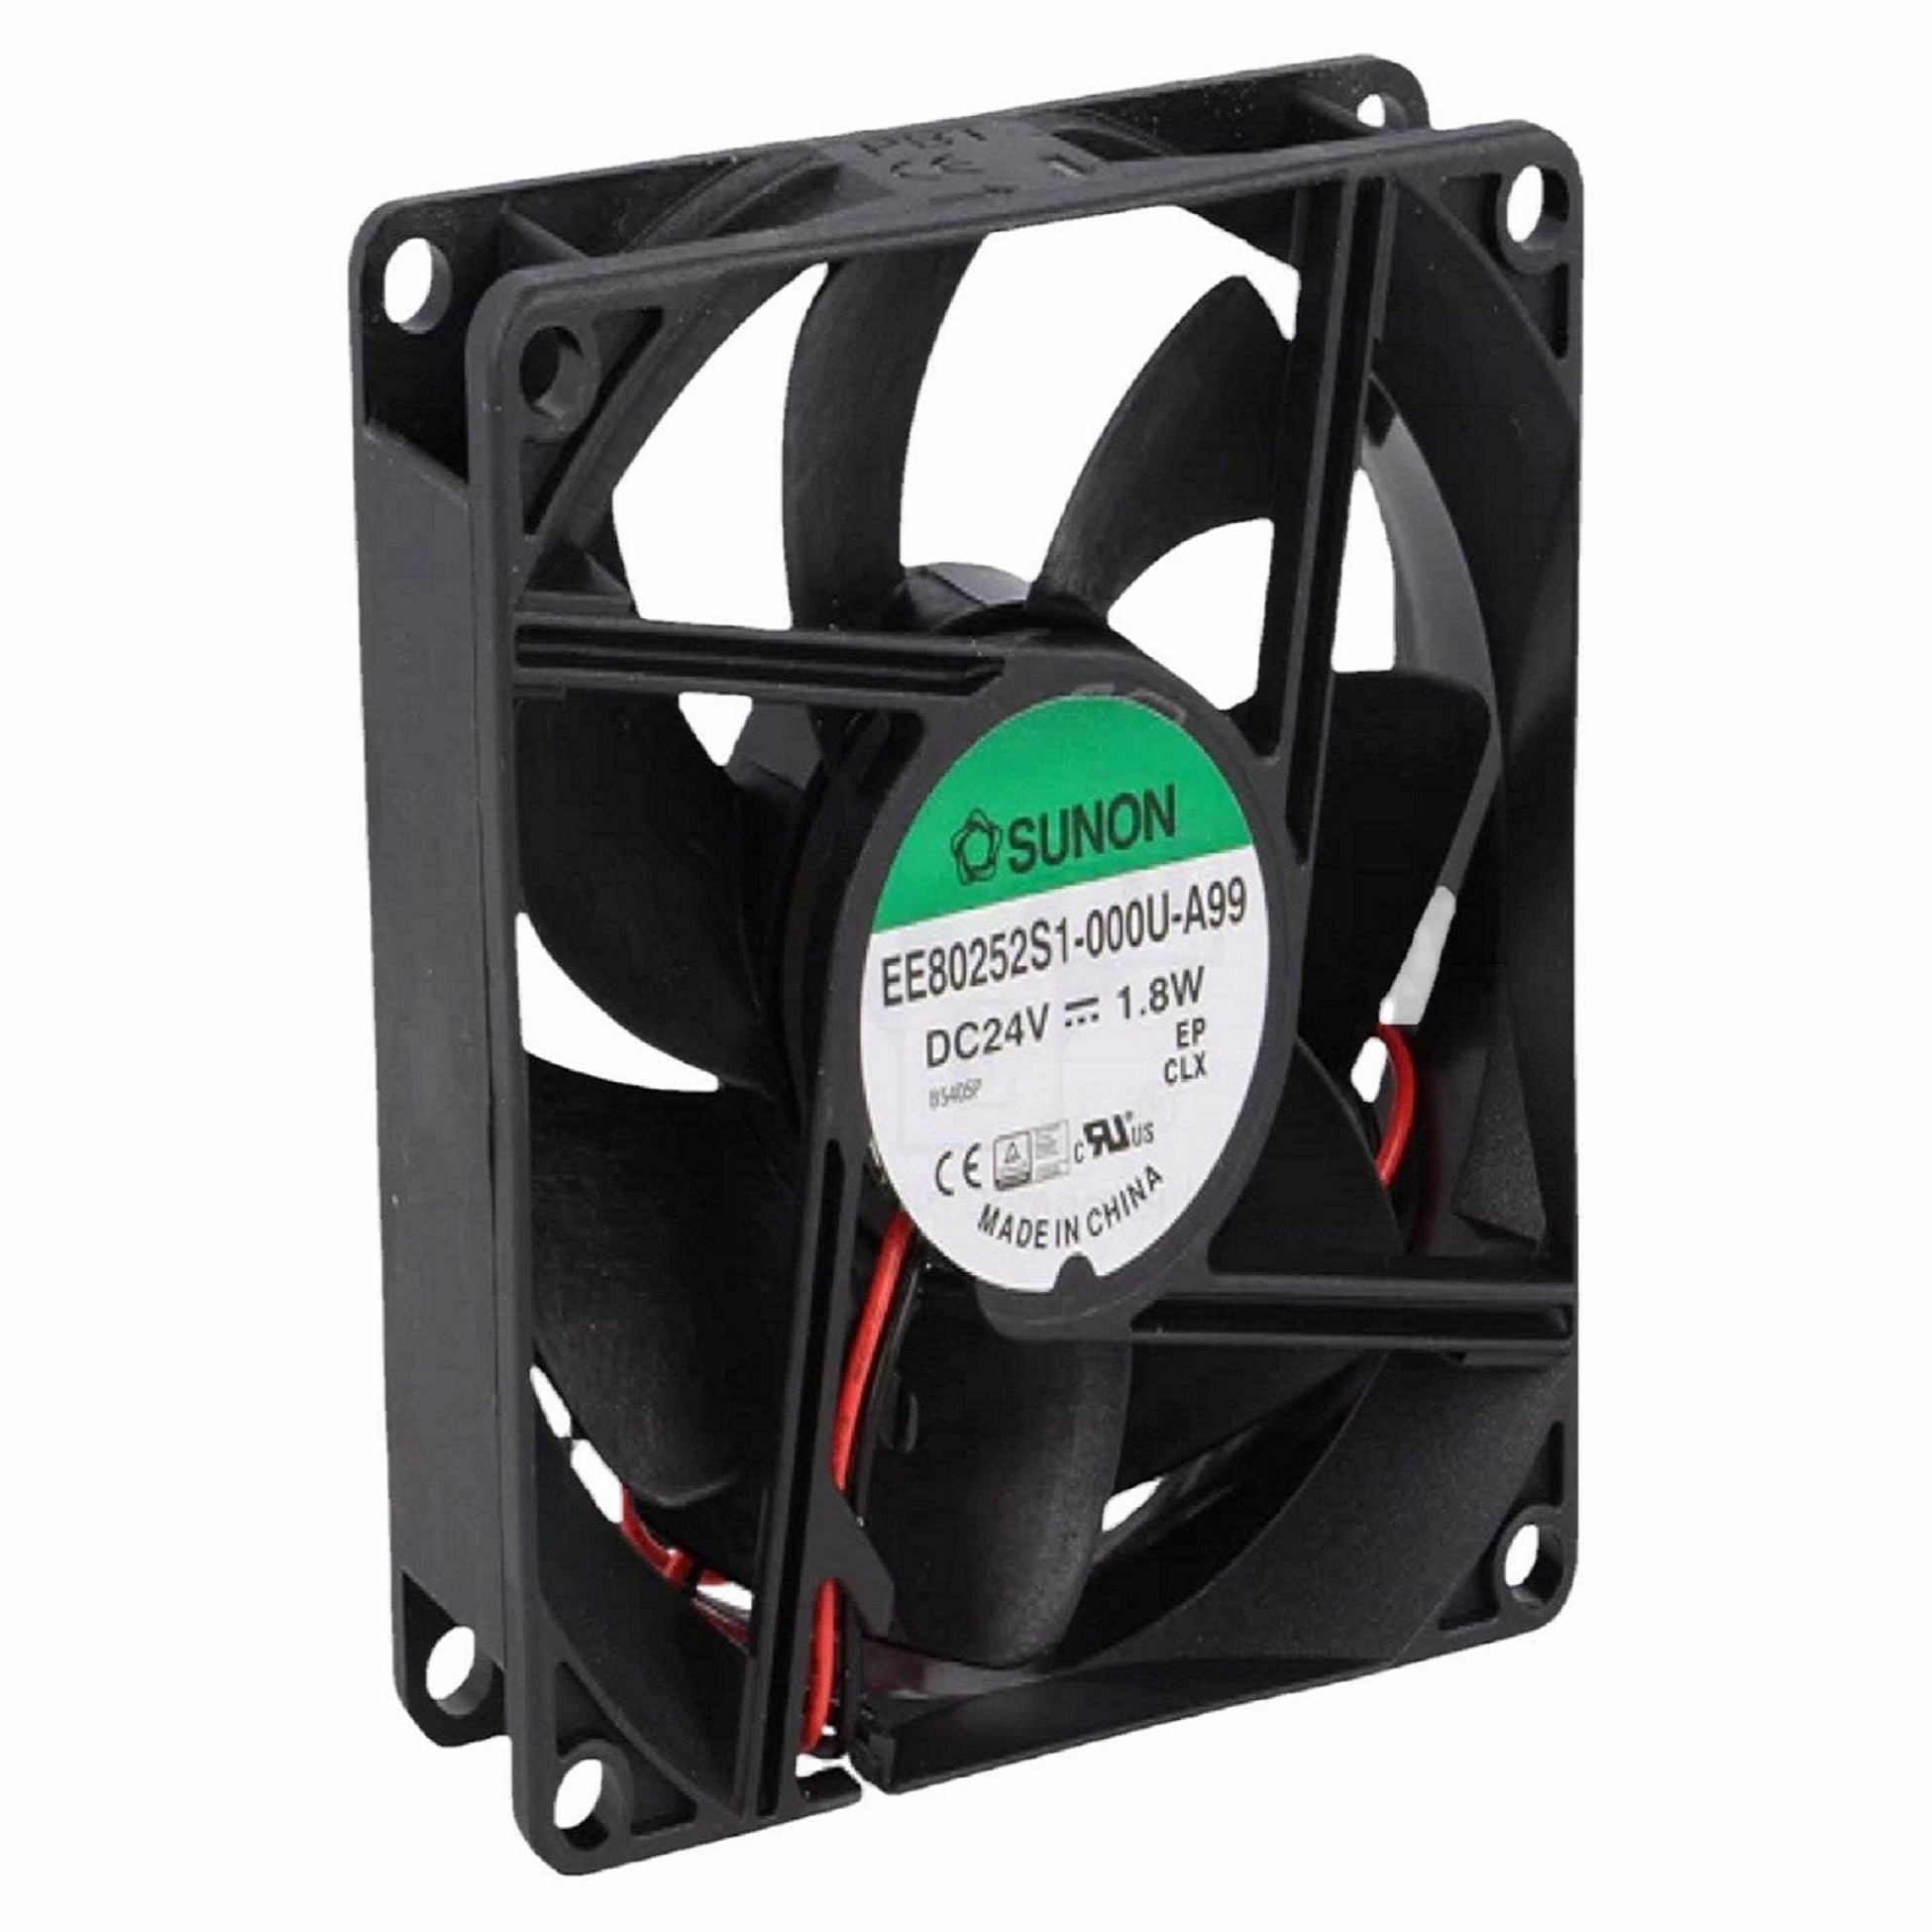 EE80252S1-0000-A99 Sunon Cooling Fans